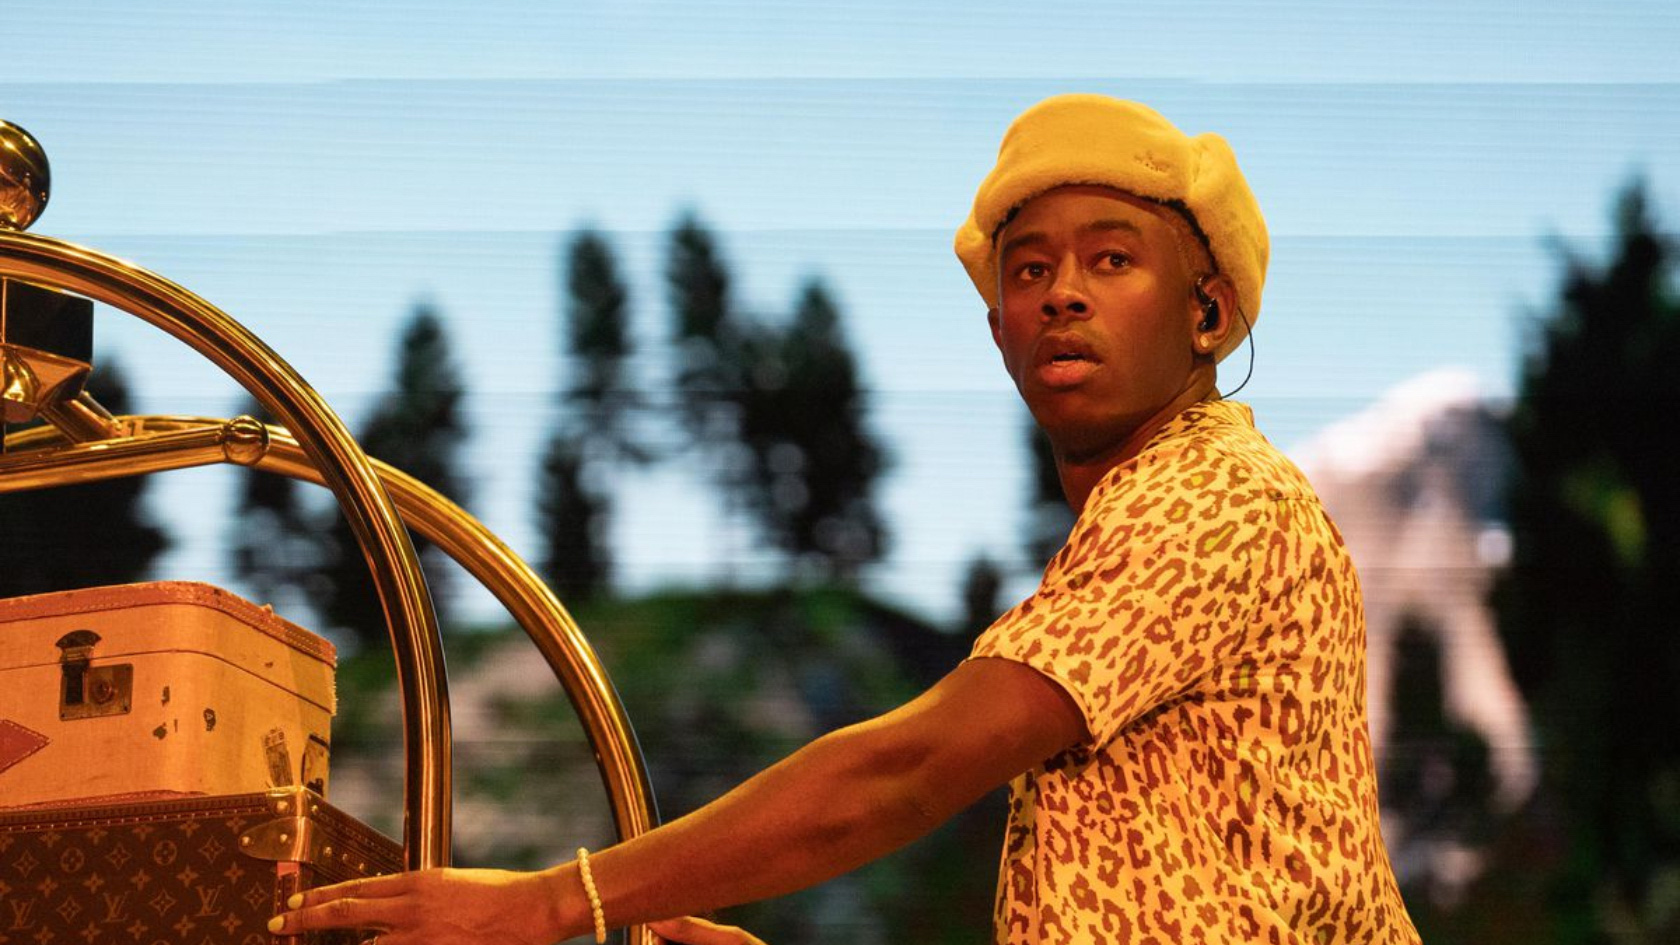 Watch Tyler, The Creator’s “Greatest Ever” Set From Lollapalooza